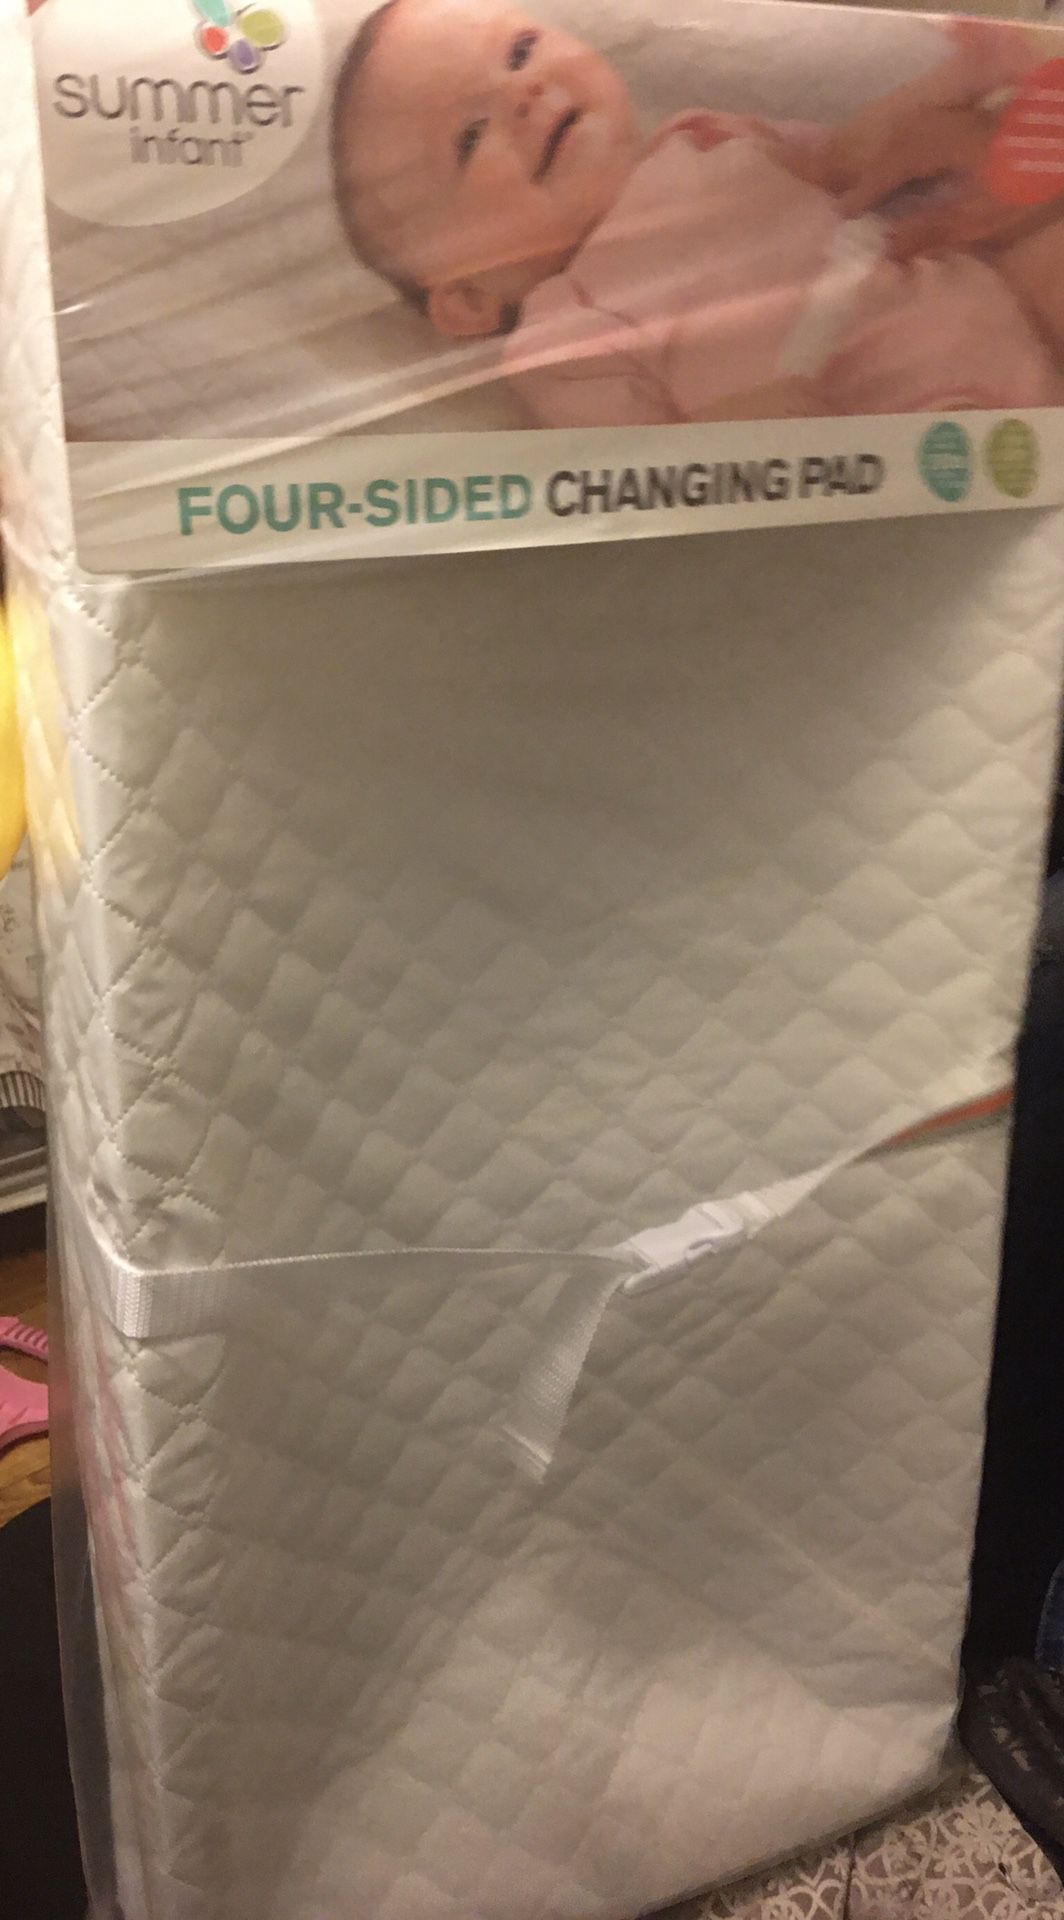 New changing pad